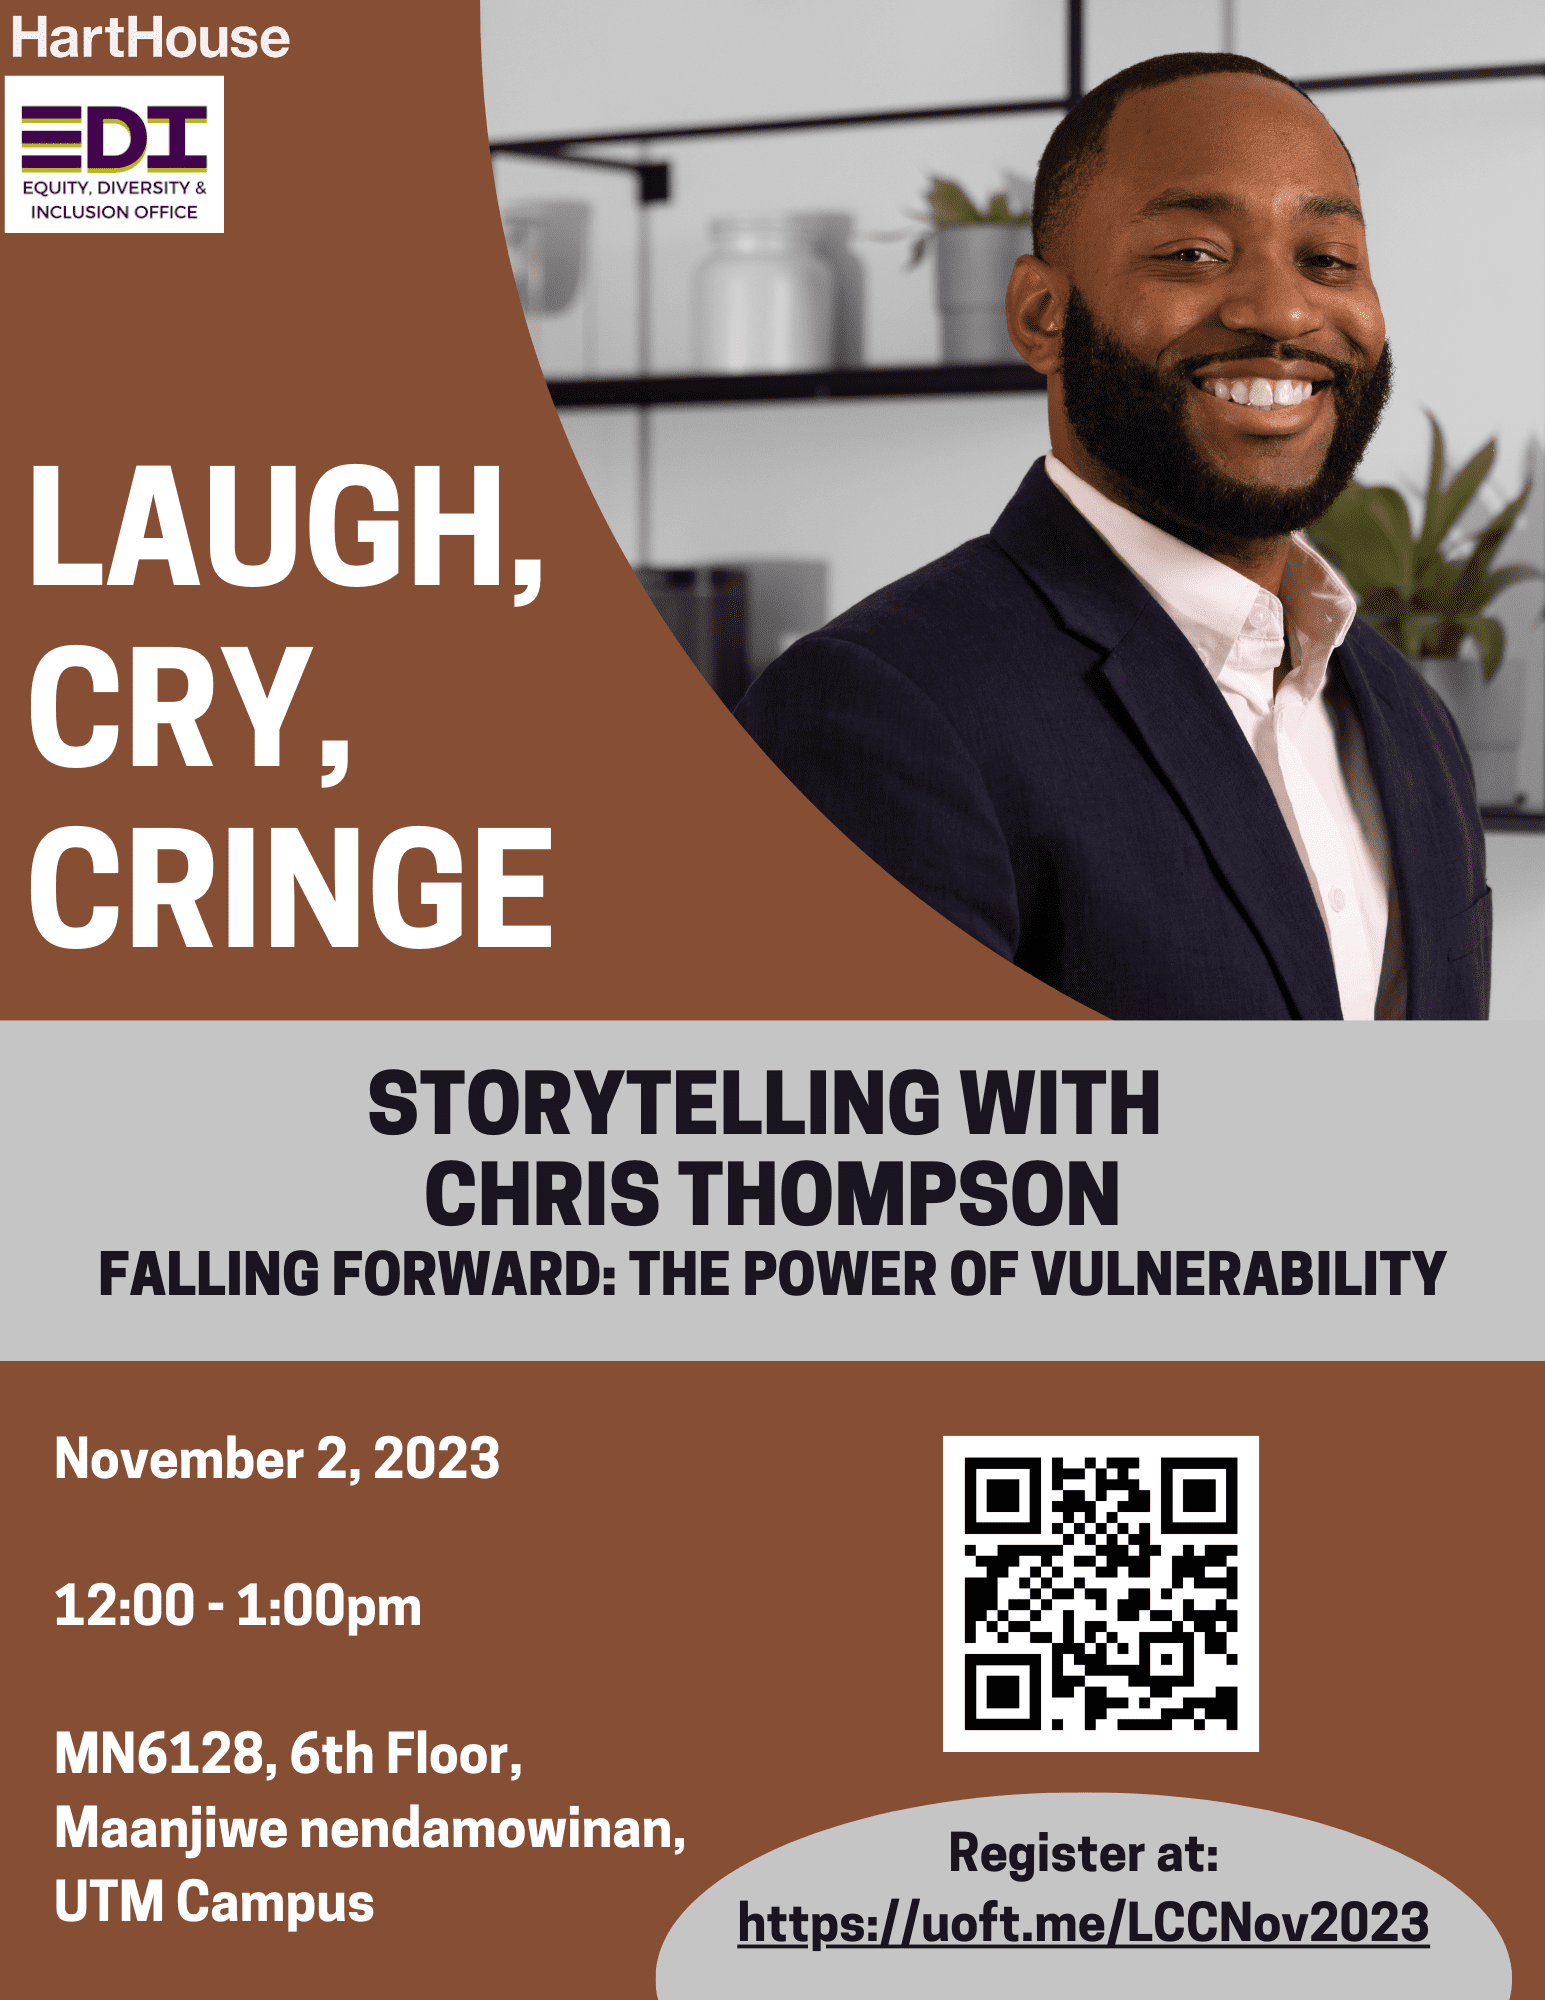 Poster for Laugh, Cry, Cringe Storytelling Event with Chris Thompson